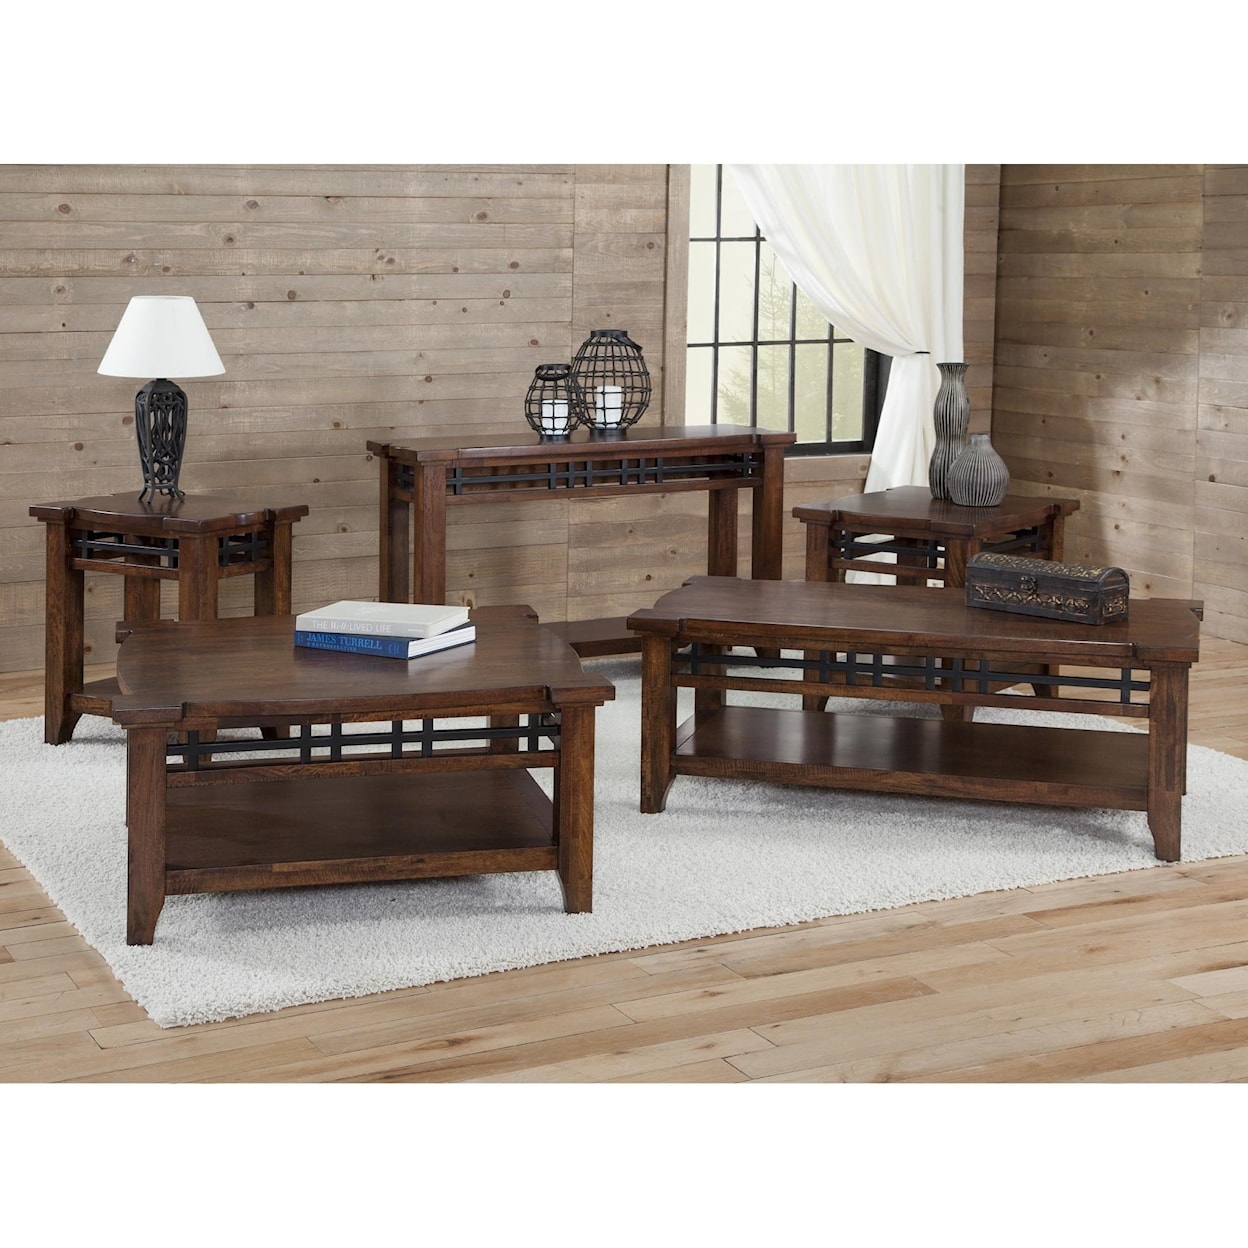 Virginia Furniture Market Solid Wood Whittier Rectangular Cocktail Table